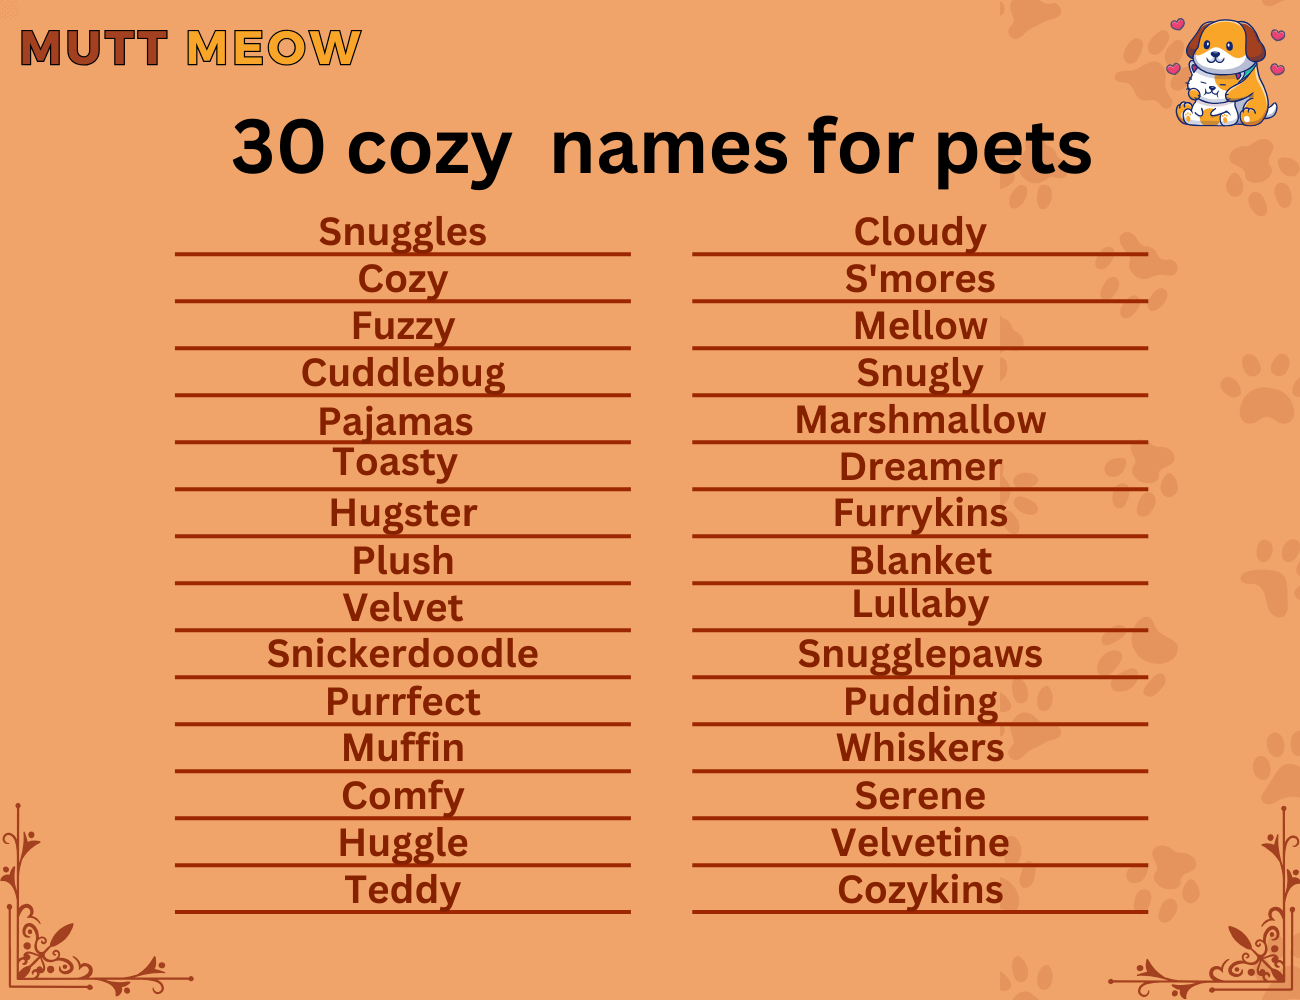 30 cozy names for pets